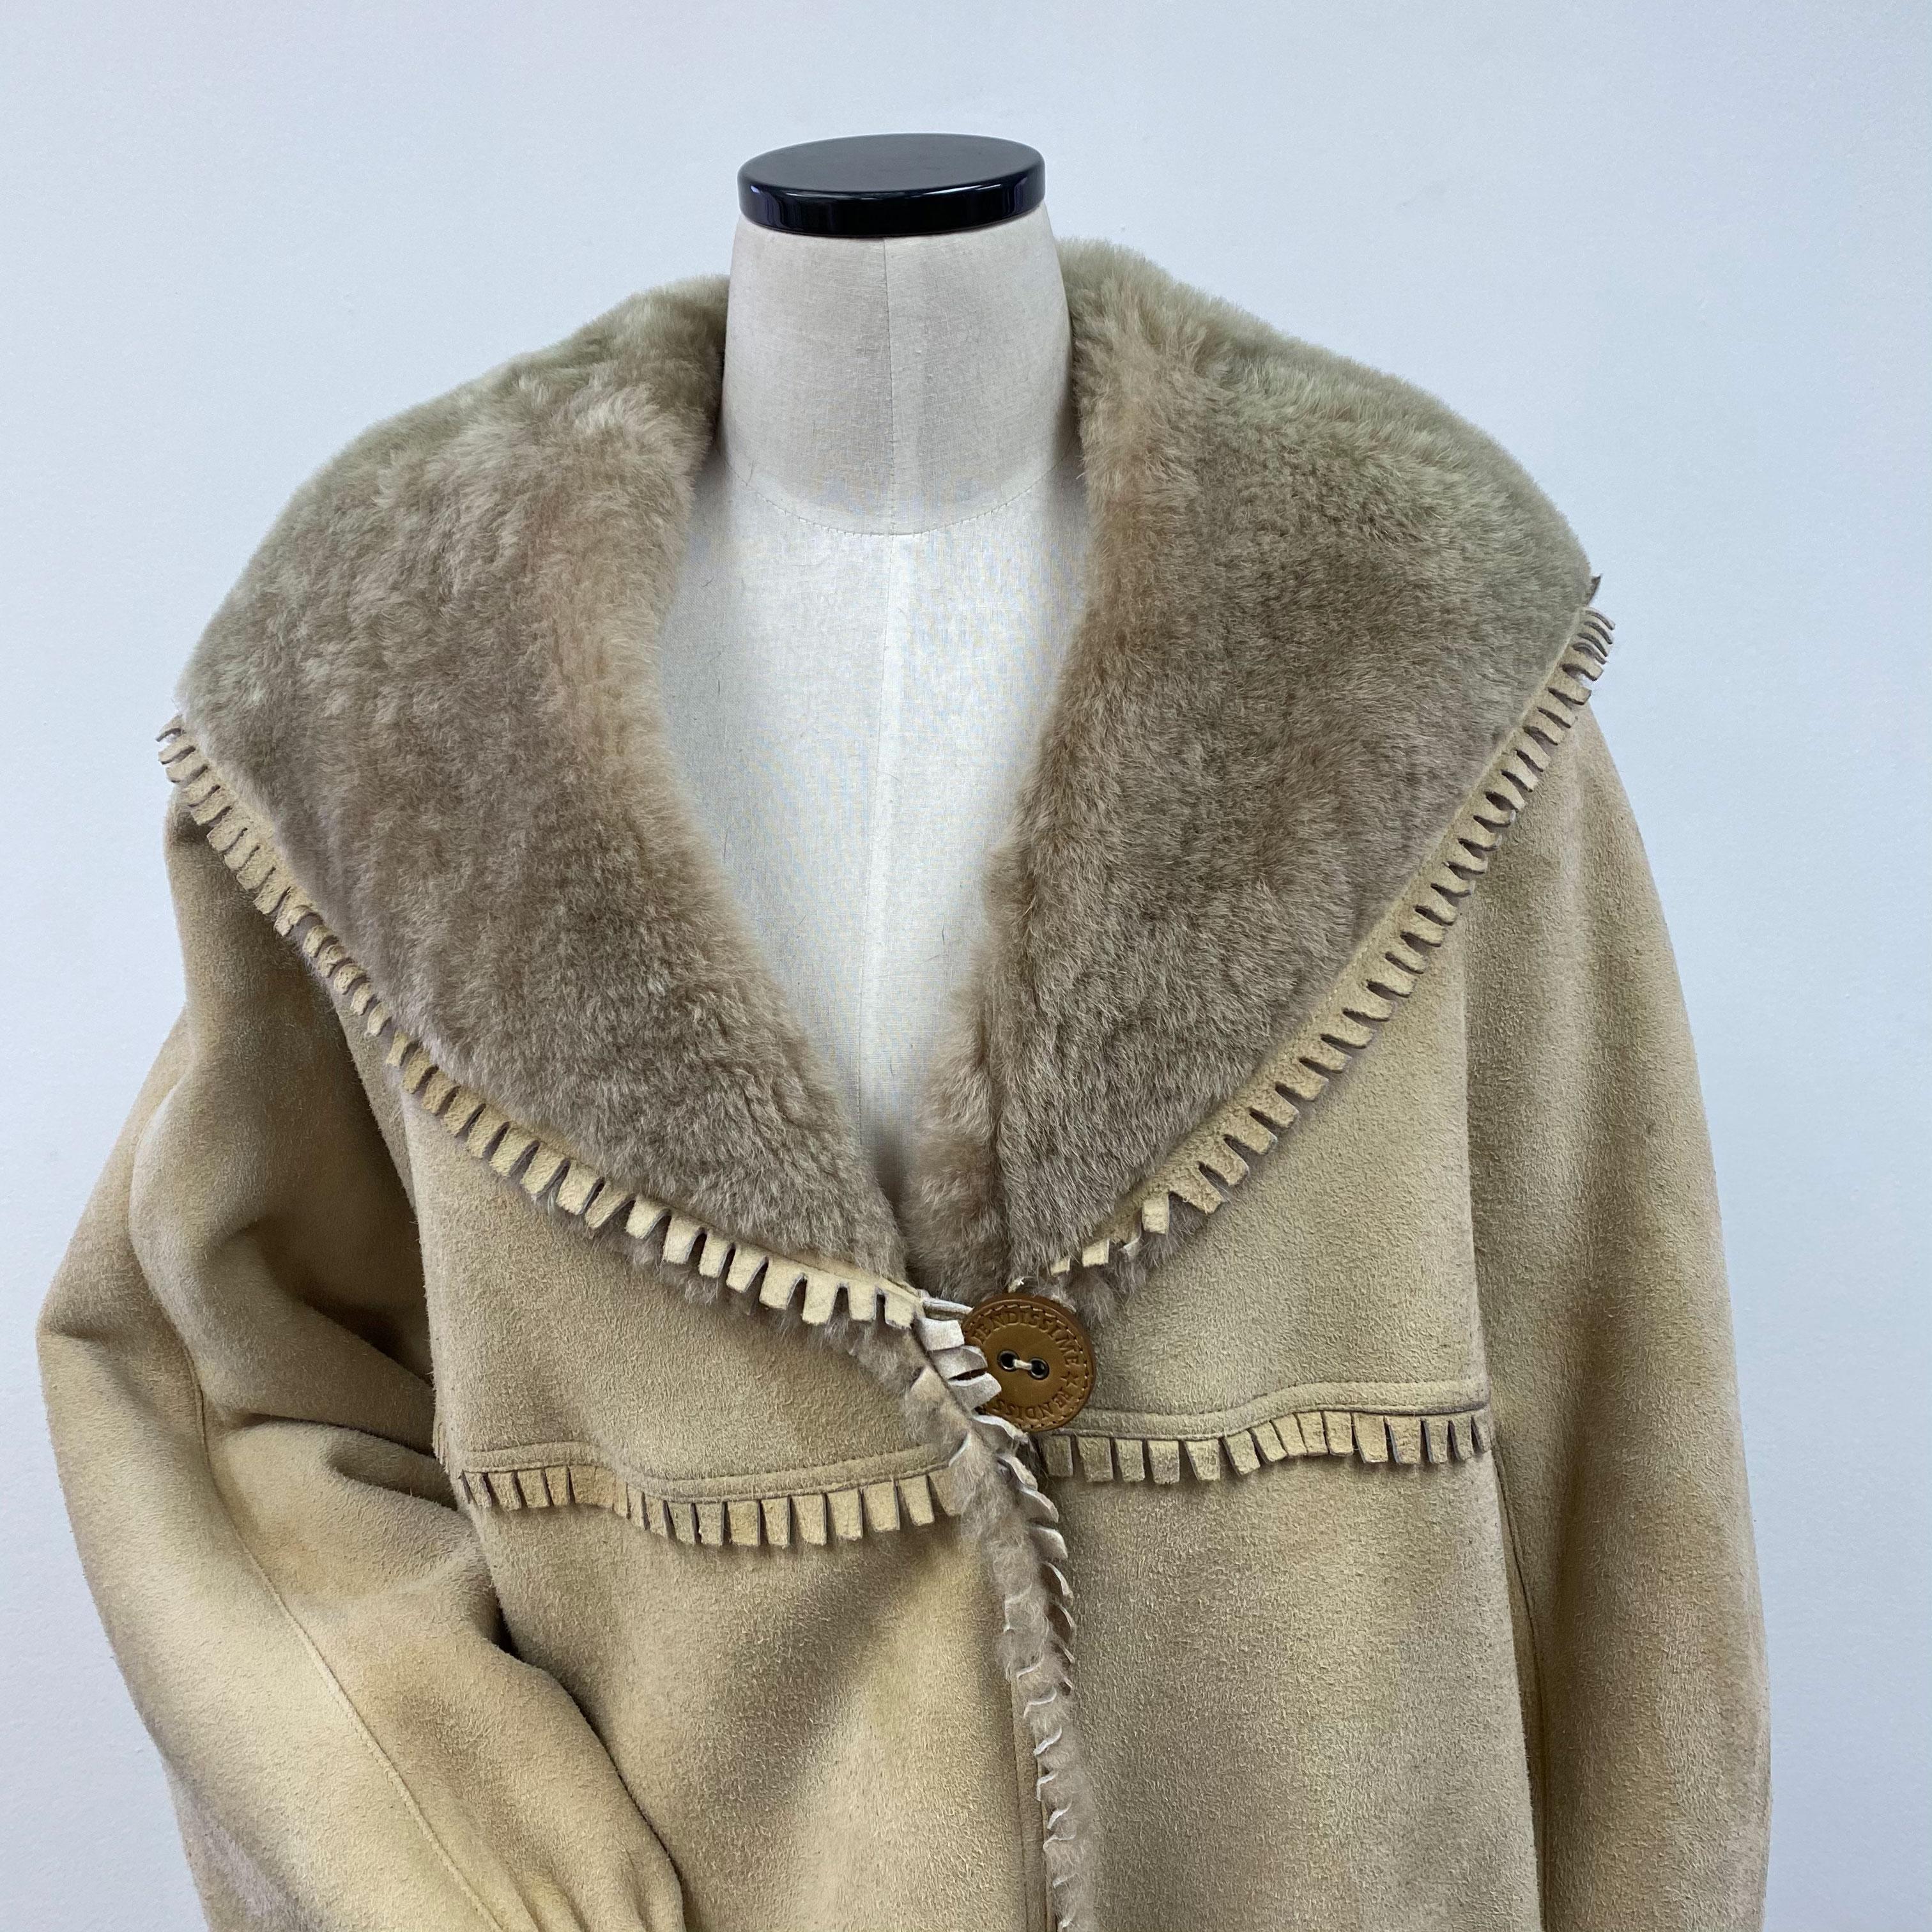 PRODUCT DESCRIPTION:

Brand New Fendissime for Holt Renfrew Italian Shearling Fur Coat in a beautiful beige cream color

Condition: New never worn

Closure: Leather buttons

Color: Beige

Material: Shearling

Garment type:  Shearling coat

Sleeves: